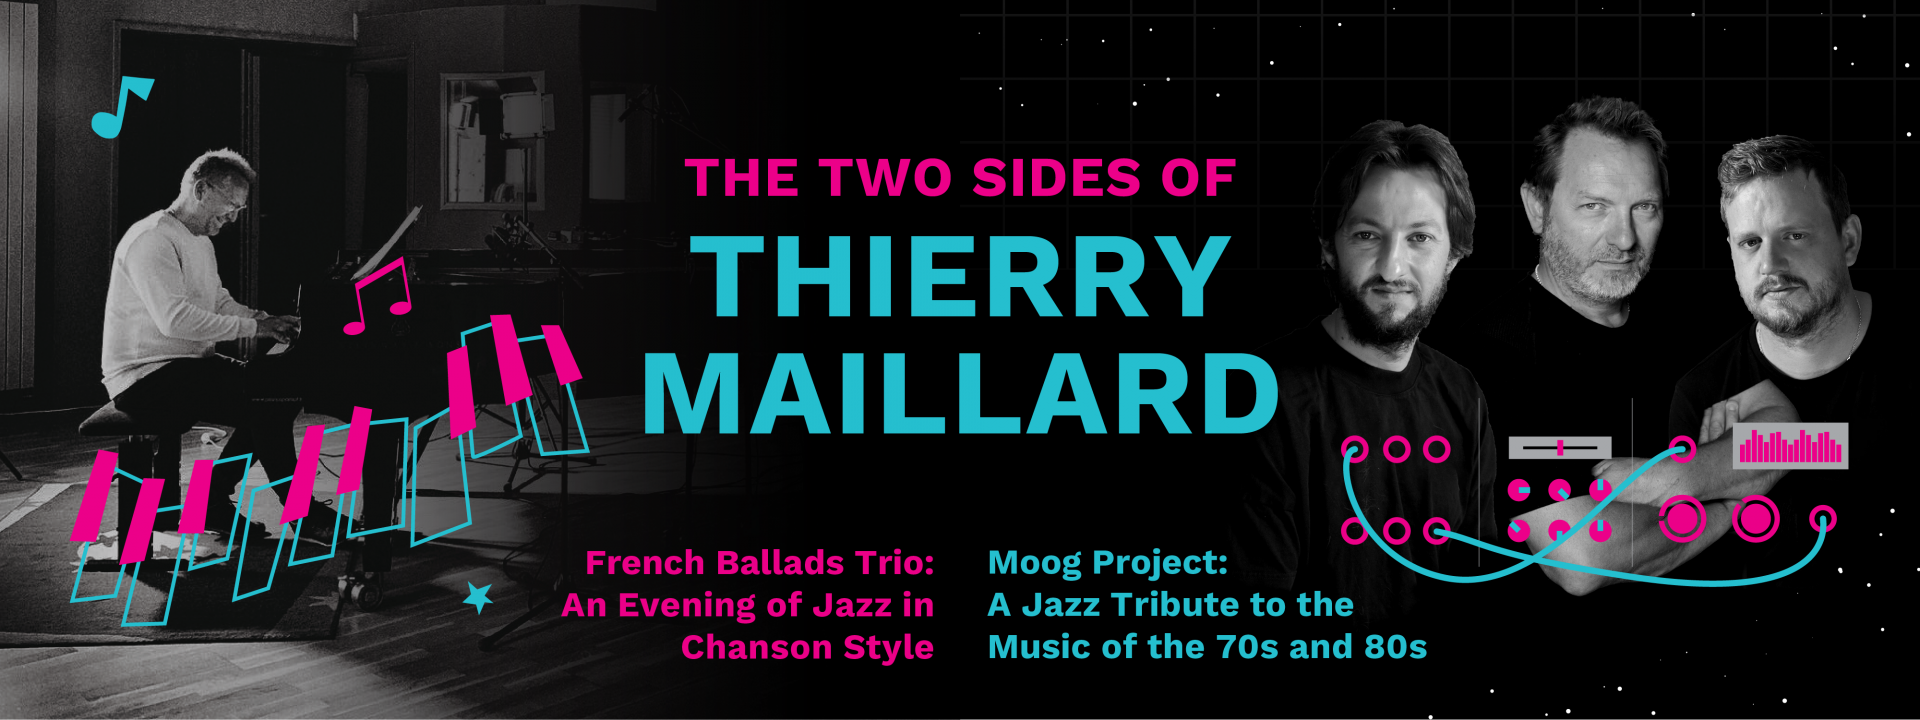 The Two Sides of Thierry Maillard